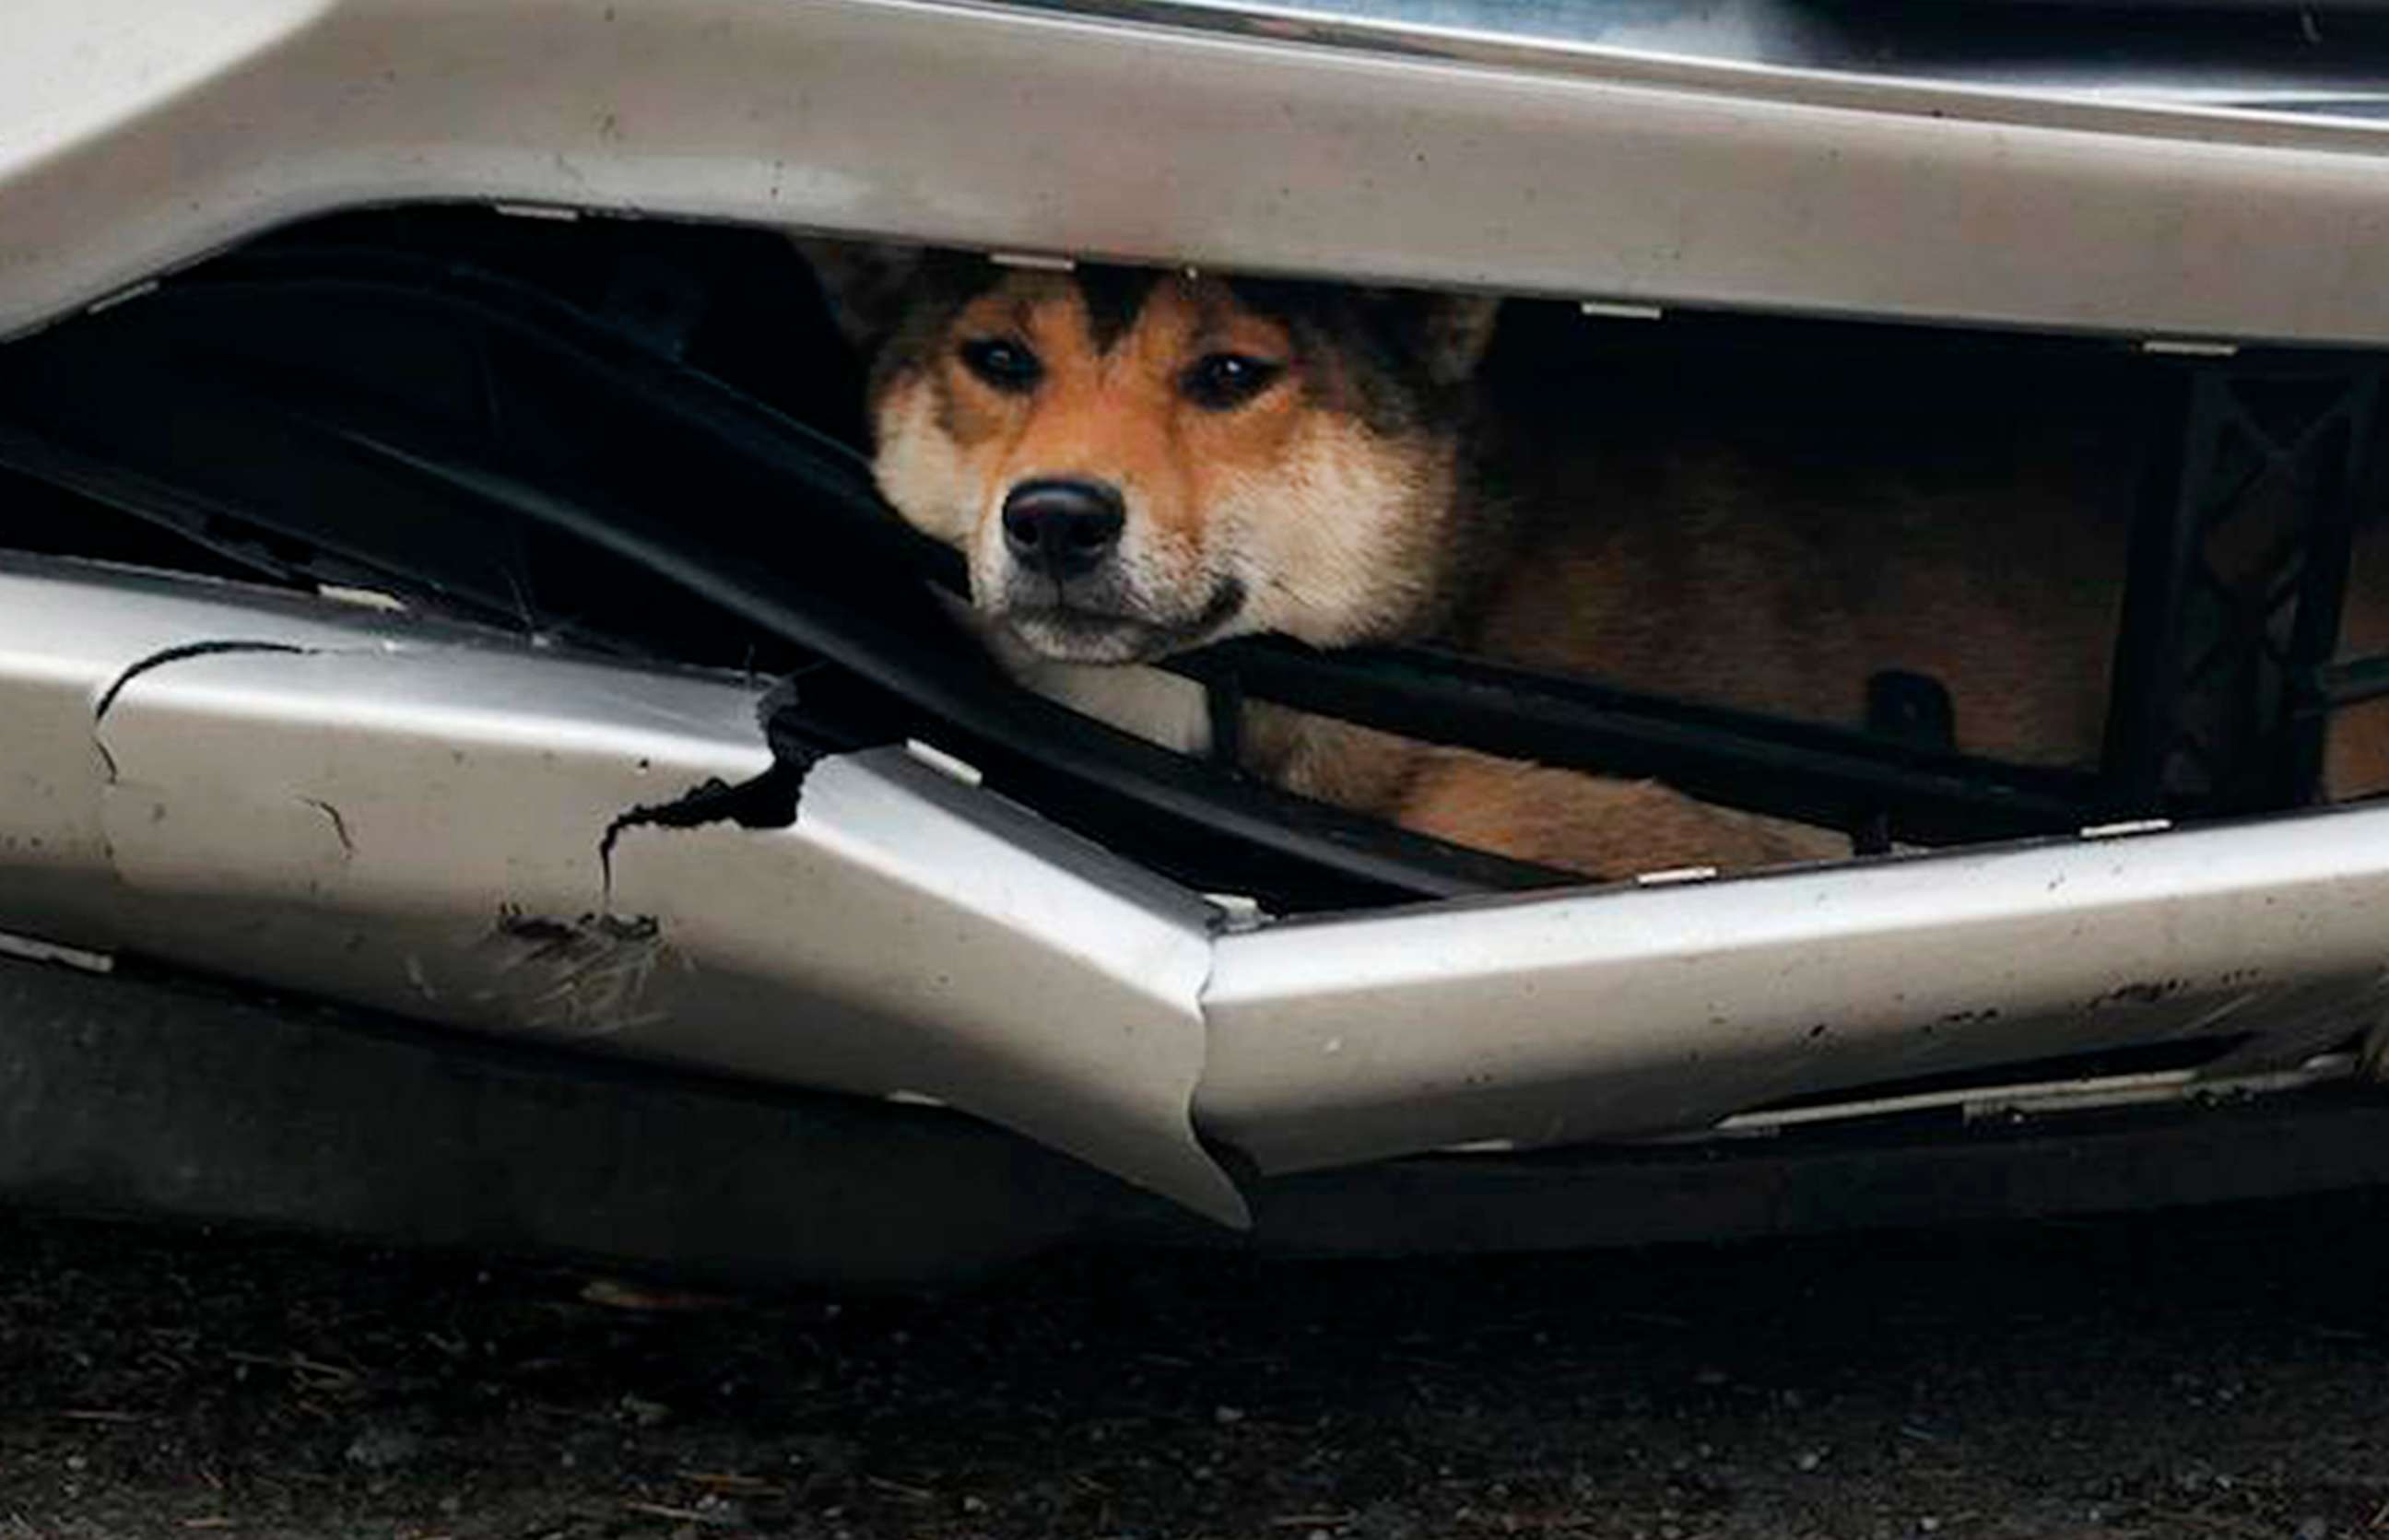 PHOTO: Coco, a Shiba inu, is pictured while trapped inside the bumper of a car after it was struck by a driver in upstate New York, Oct. 28, 2019.